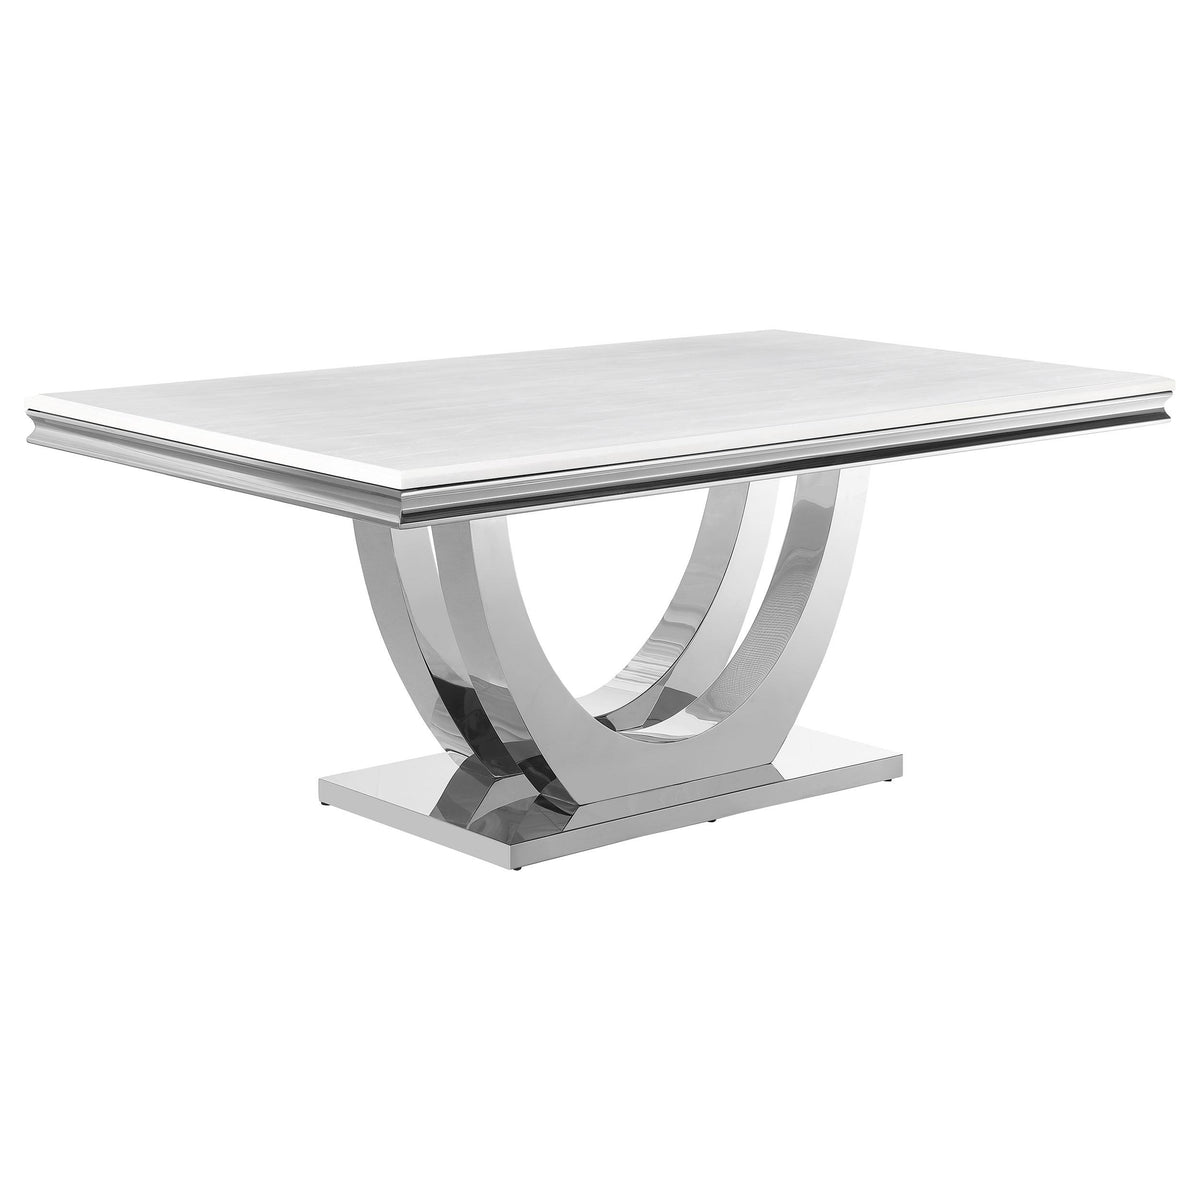 Kerwin Rectangle Faux Marble Top Dining Table White and Chrome Kerwin Rectangle Faux Marble Top Dining Table White and Chrome Half Price Furniture